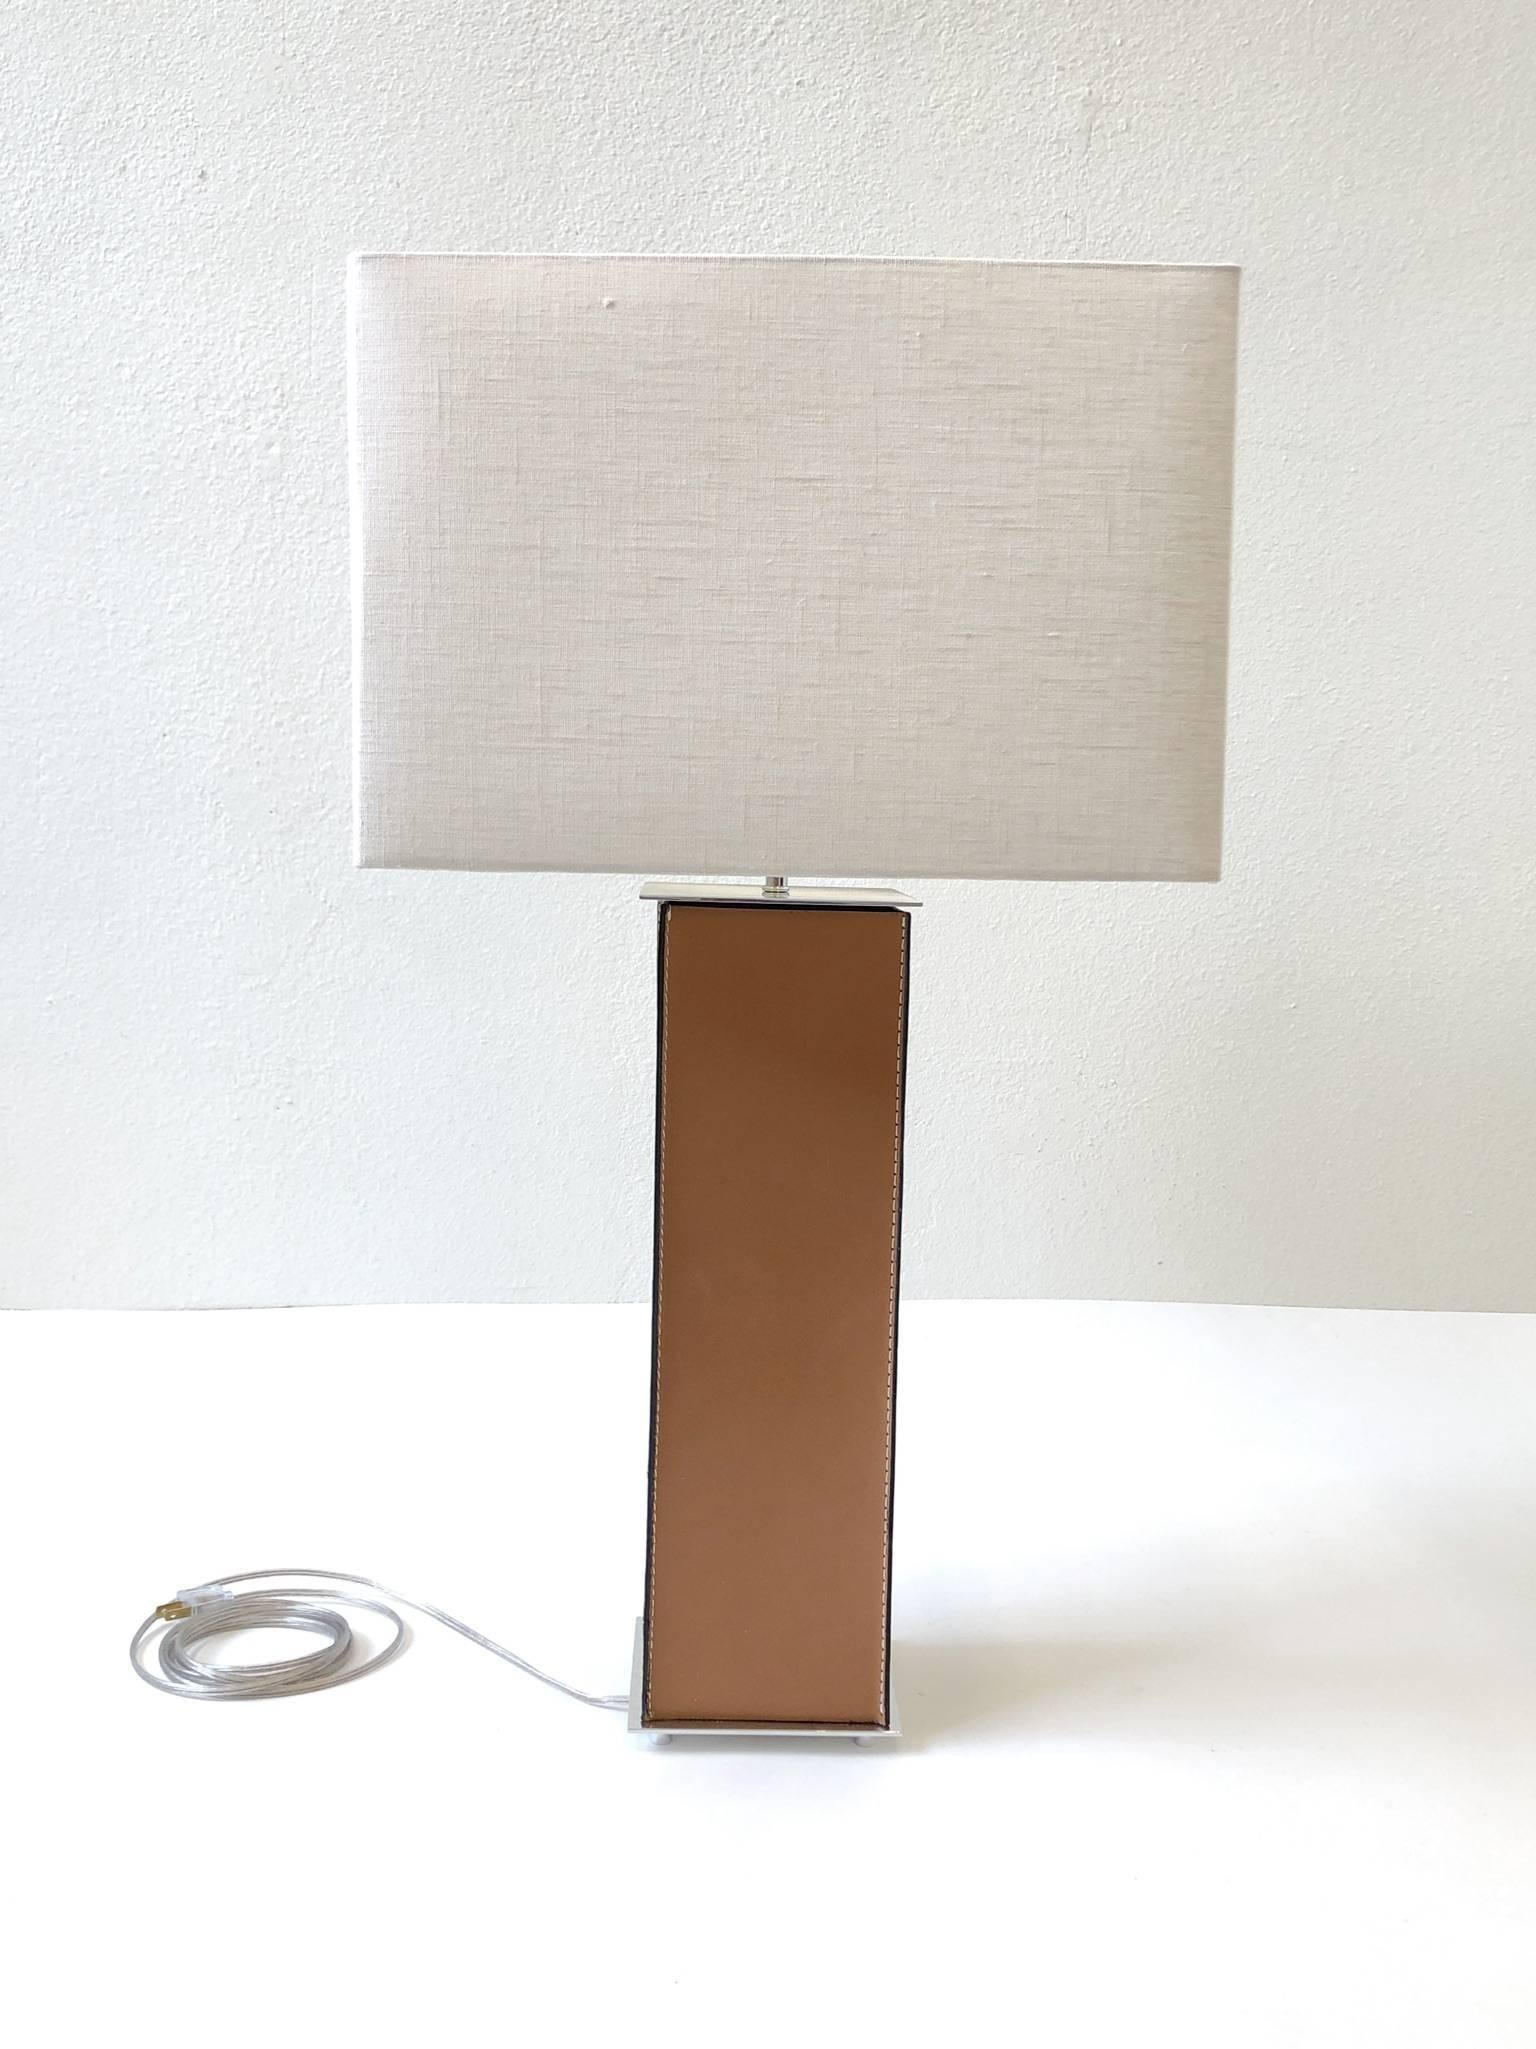 Nickel Pair of Saddle Stitch Leather Table Lamps by Laurel